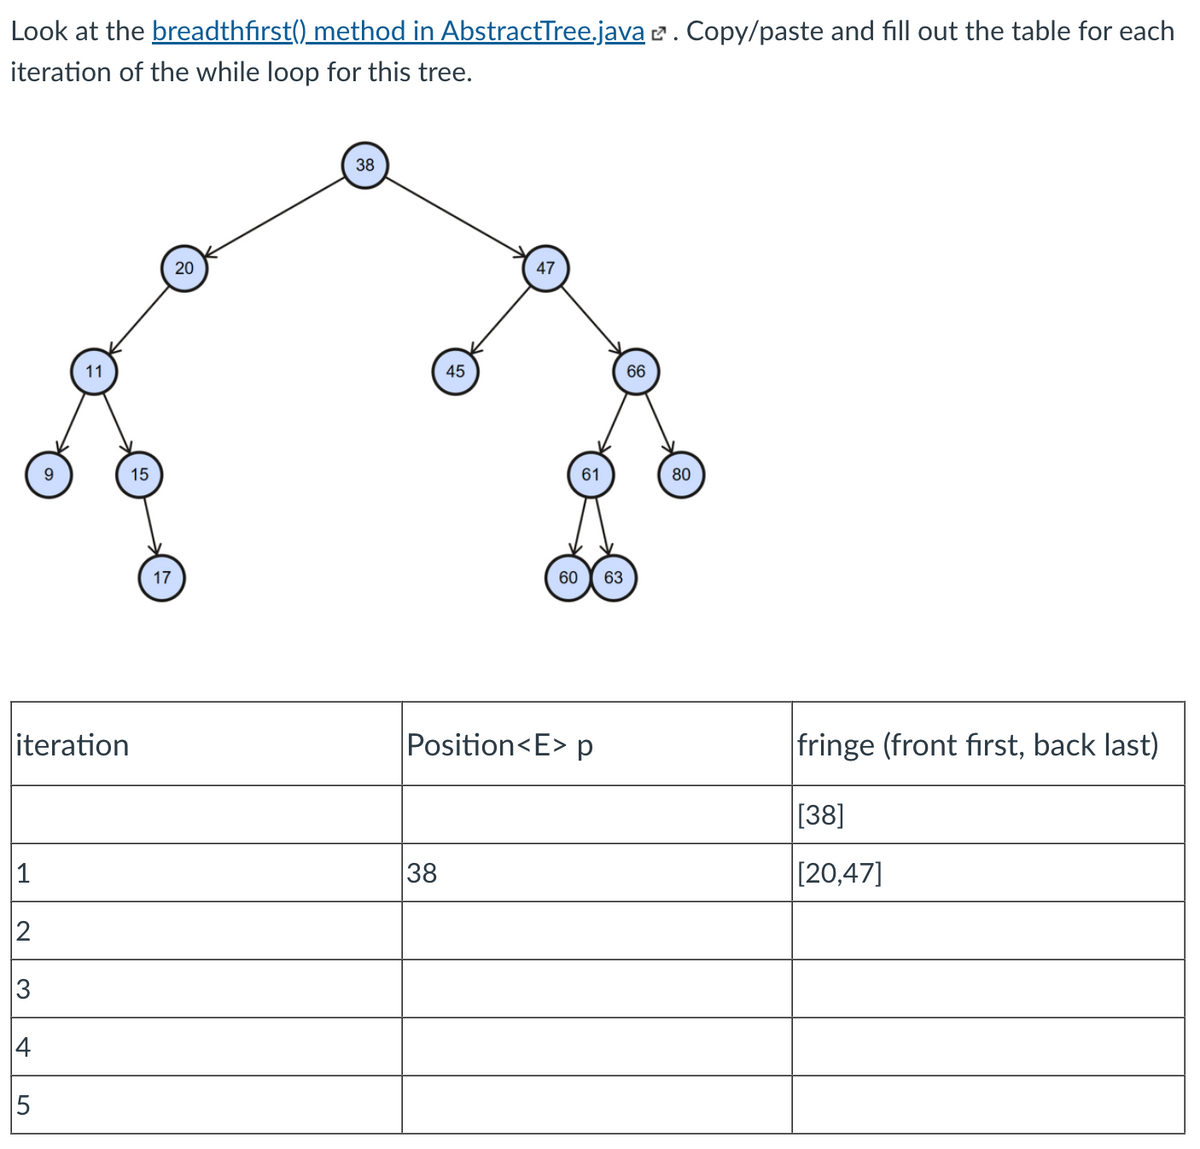 Look at the breadthfirst() method in AbstractTree.java 2. Copy/paste and fill out the table for each
iteration of the while loop for this tree.
38
20
47
11
45
66
15
61
80
17
60
63
iteration
Position<E> p
fringe (front first, back last)
[38]
1
38
[20,47]
2
4
